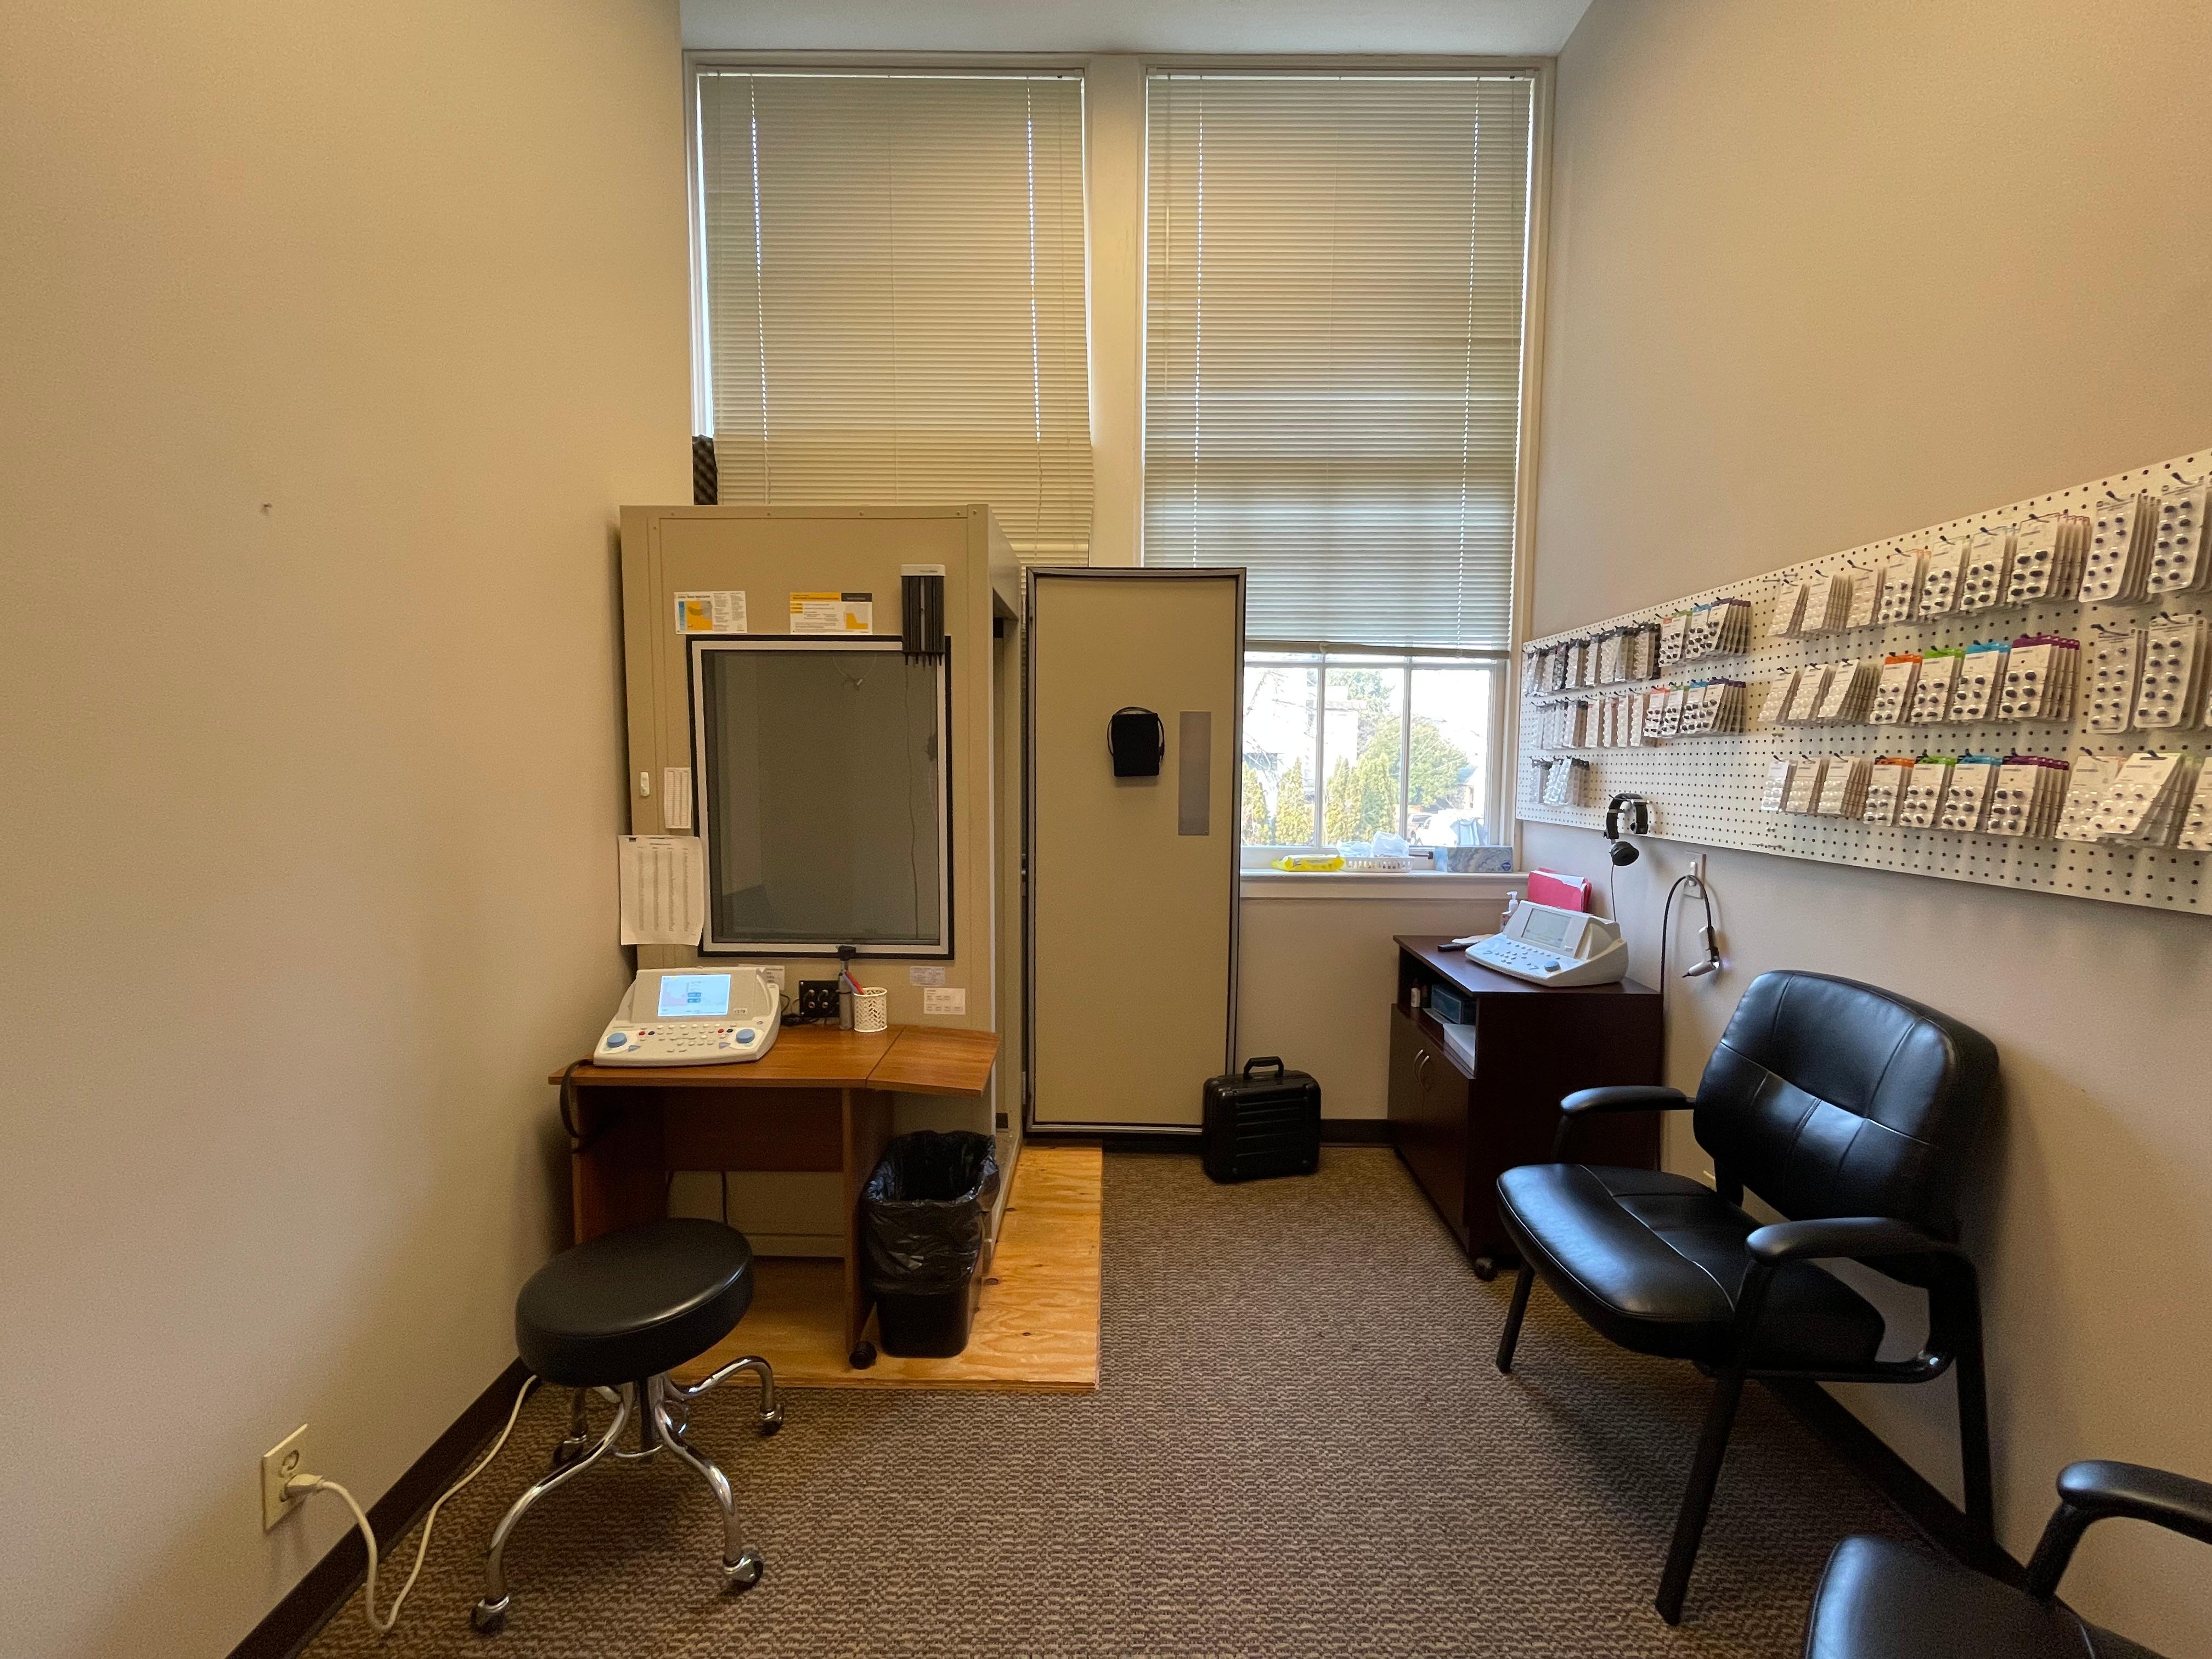 Image 5 | Puget Sound Hearing Aid & Audiology - Seattle